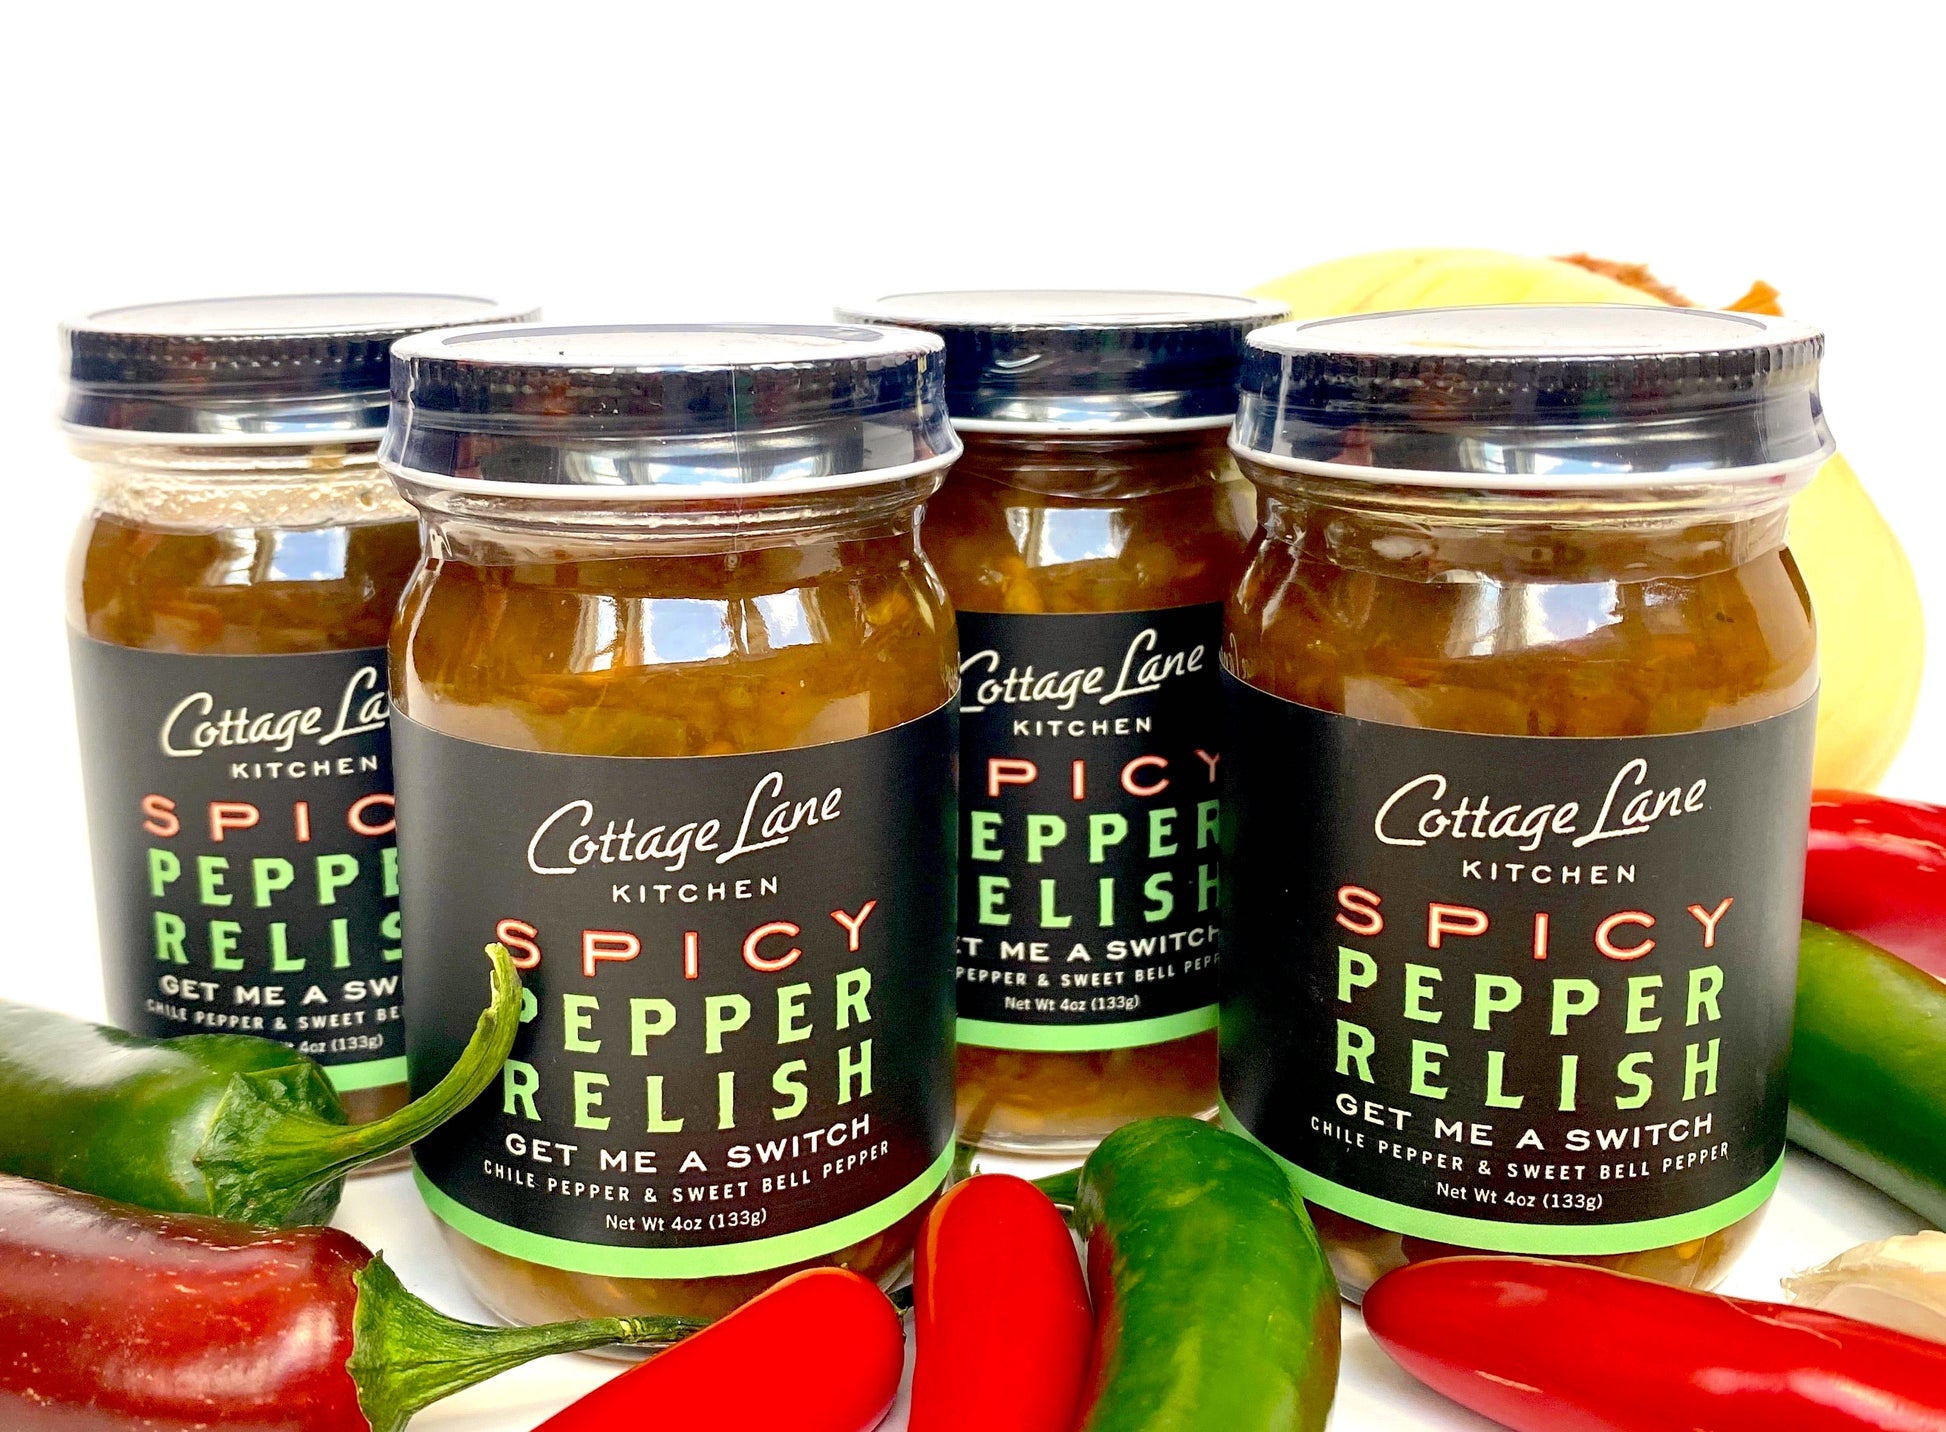 four 4oz bottles of get me a switch spicy pepper relish by cottage lane kitchen